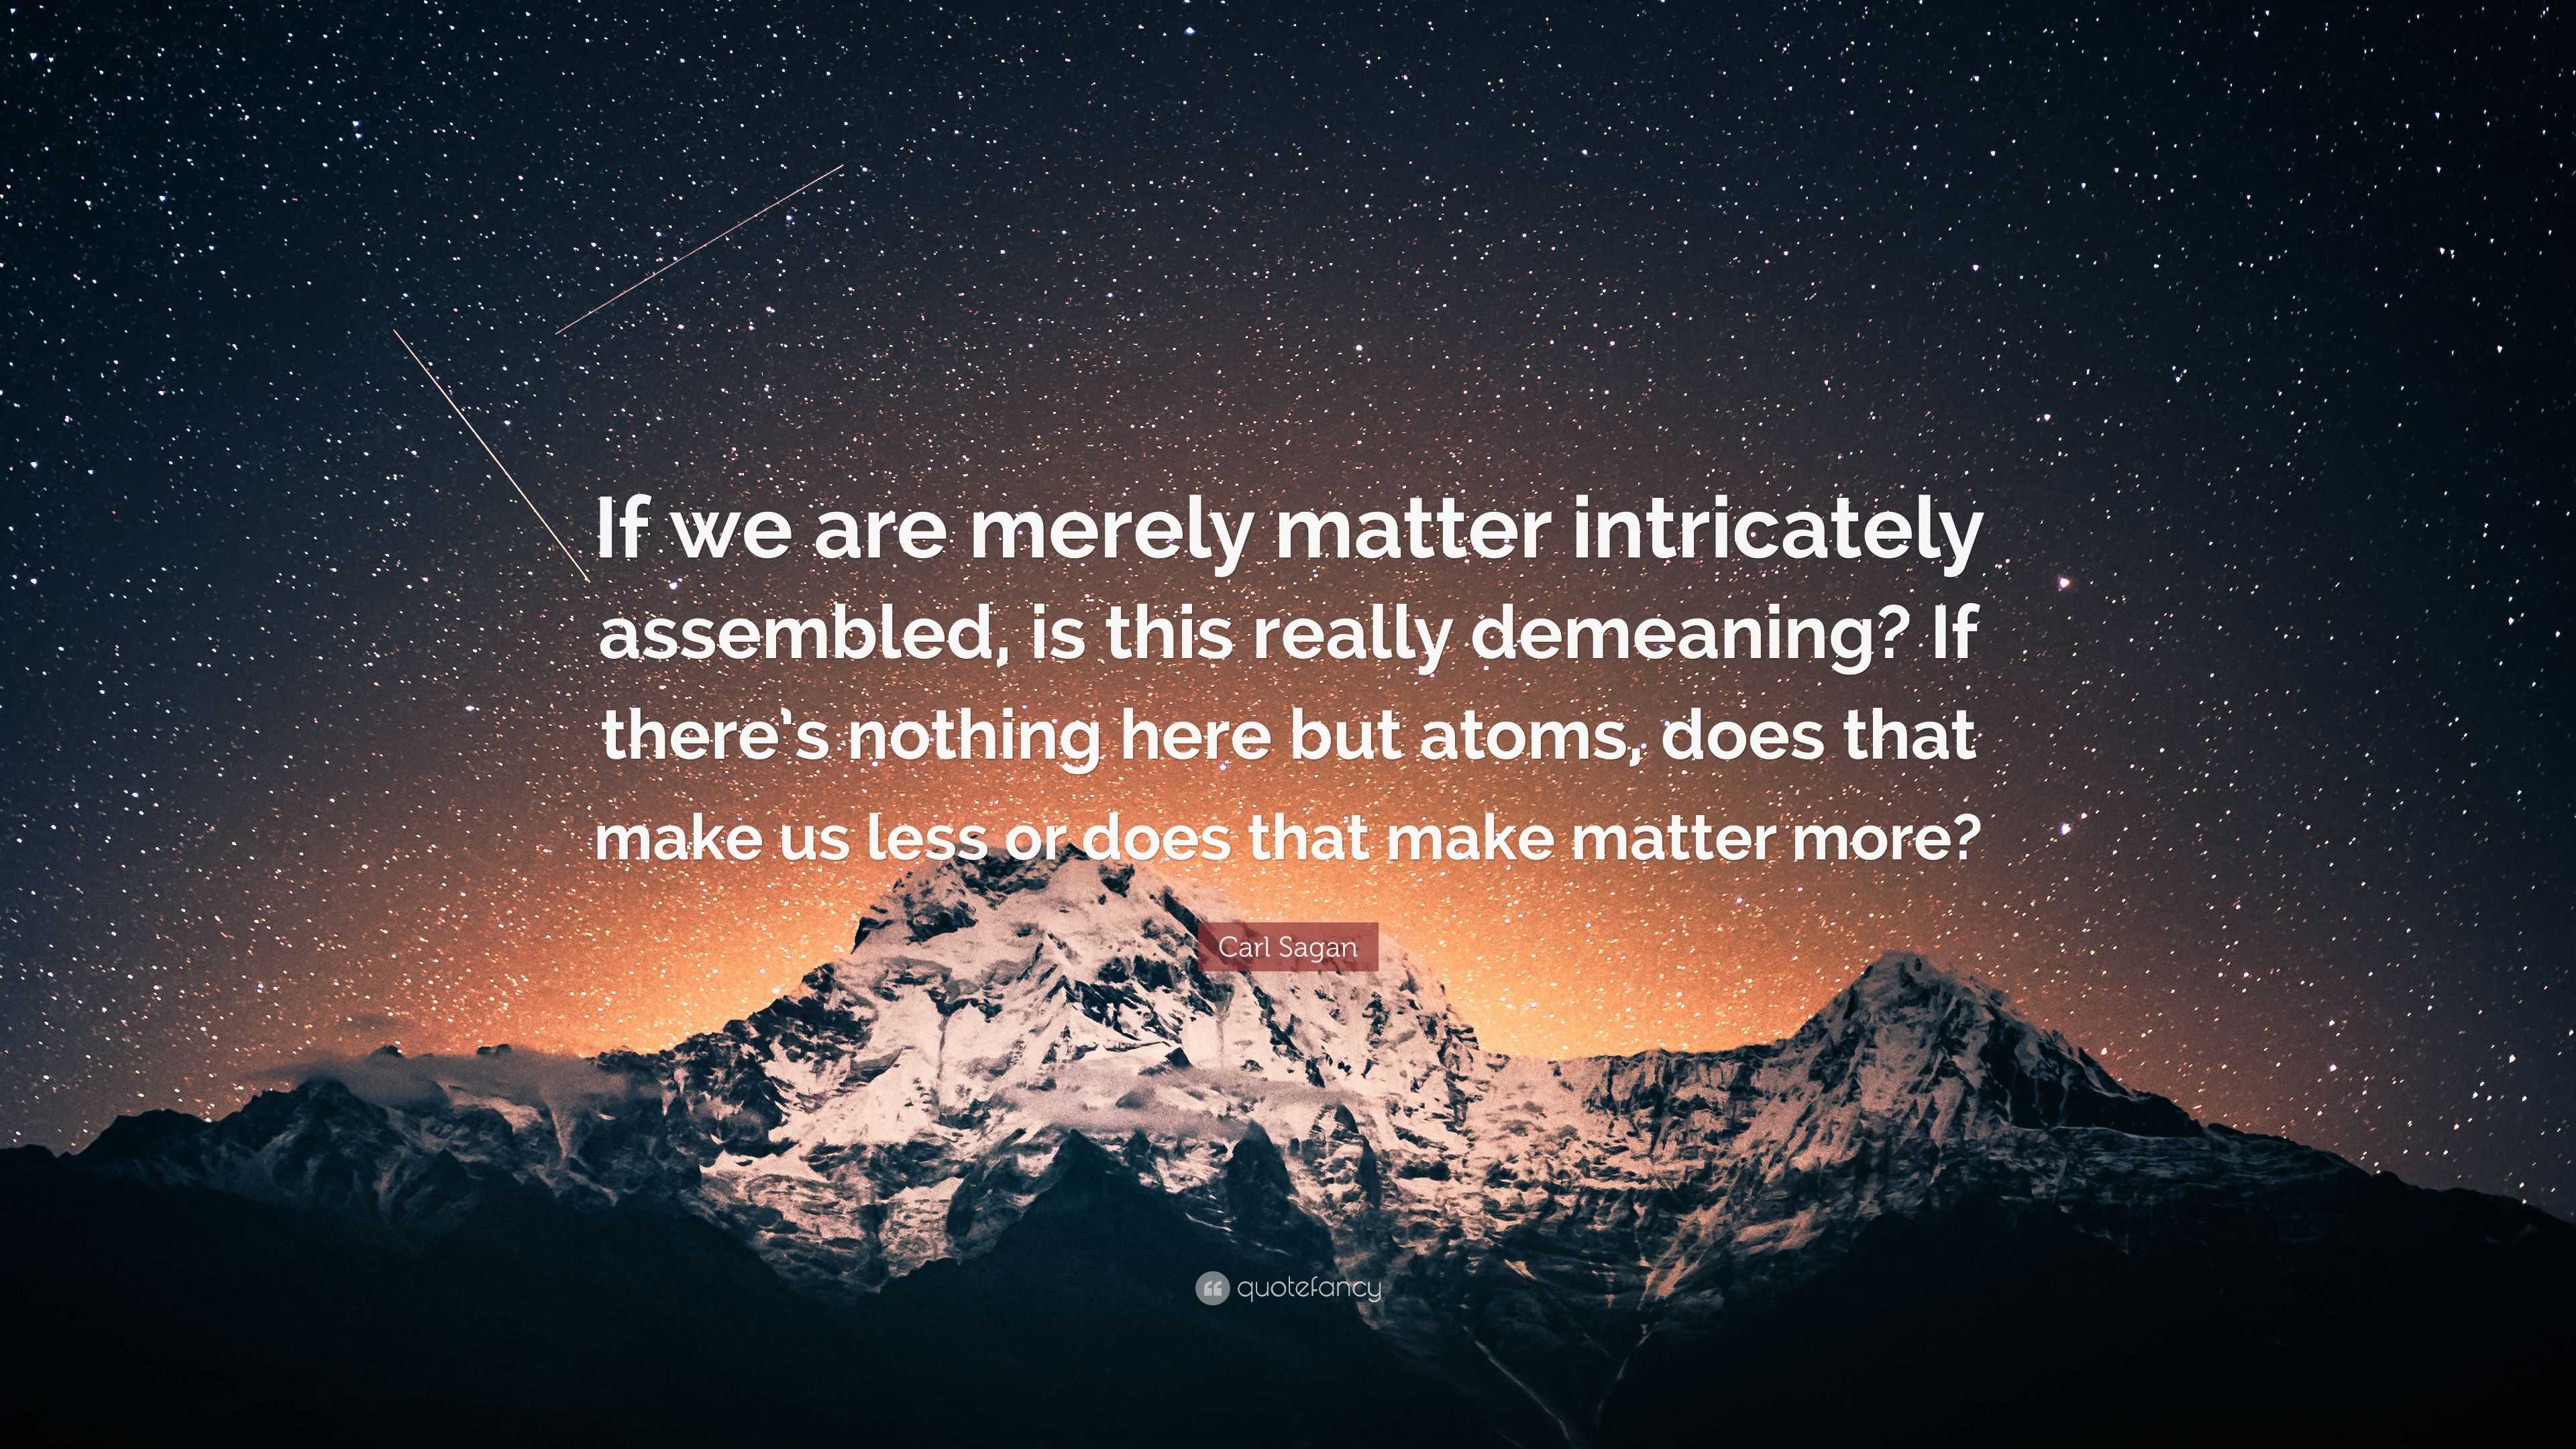 Can we manufacture matter?